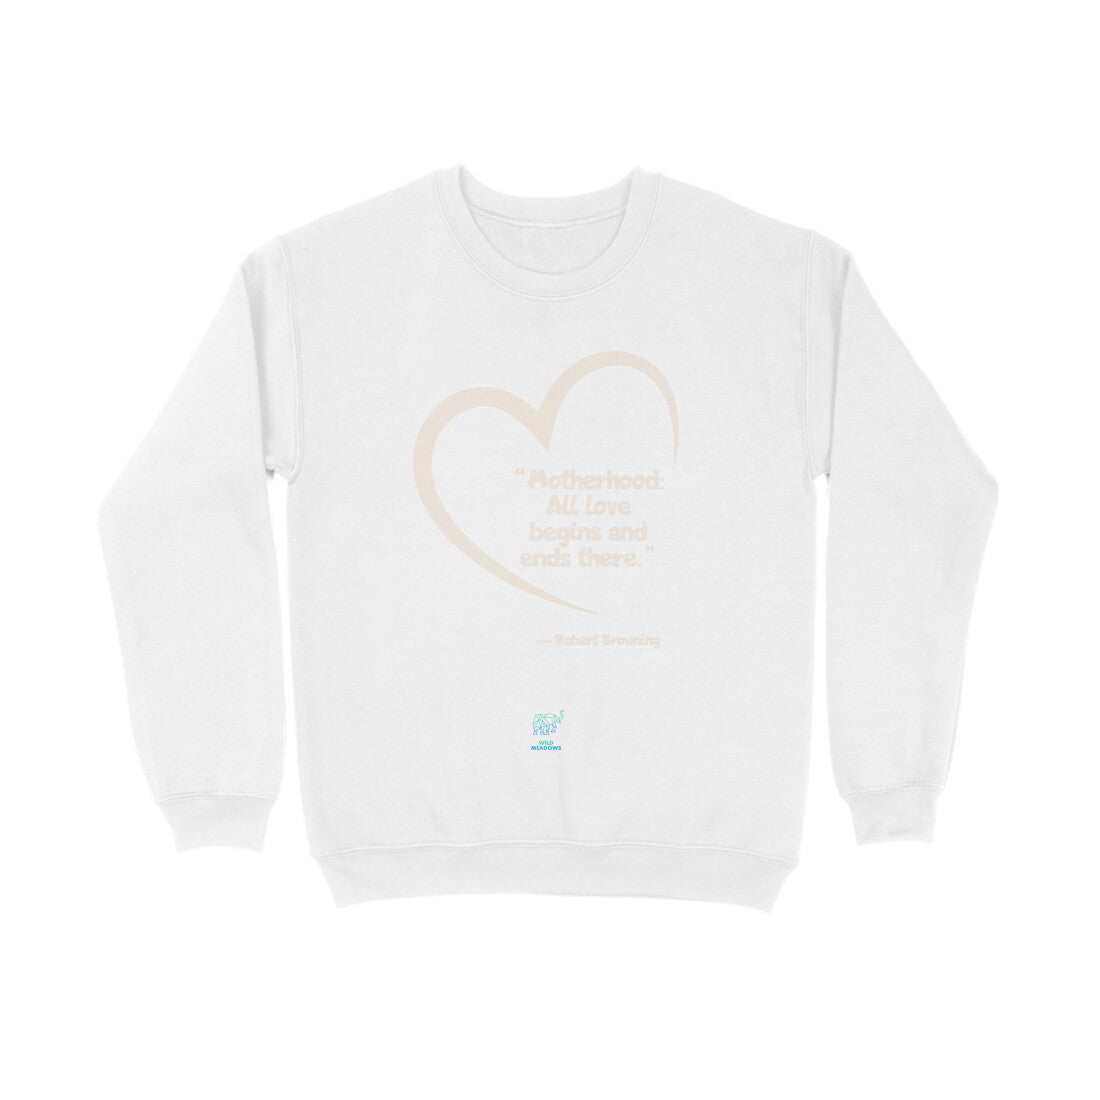 Mother-All love begins and ends there - Unisex Sweatshirt